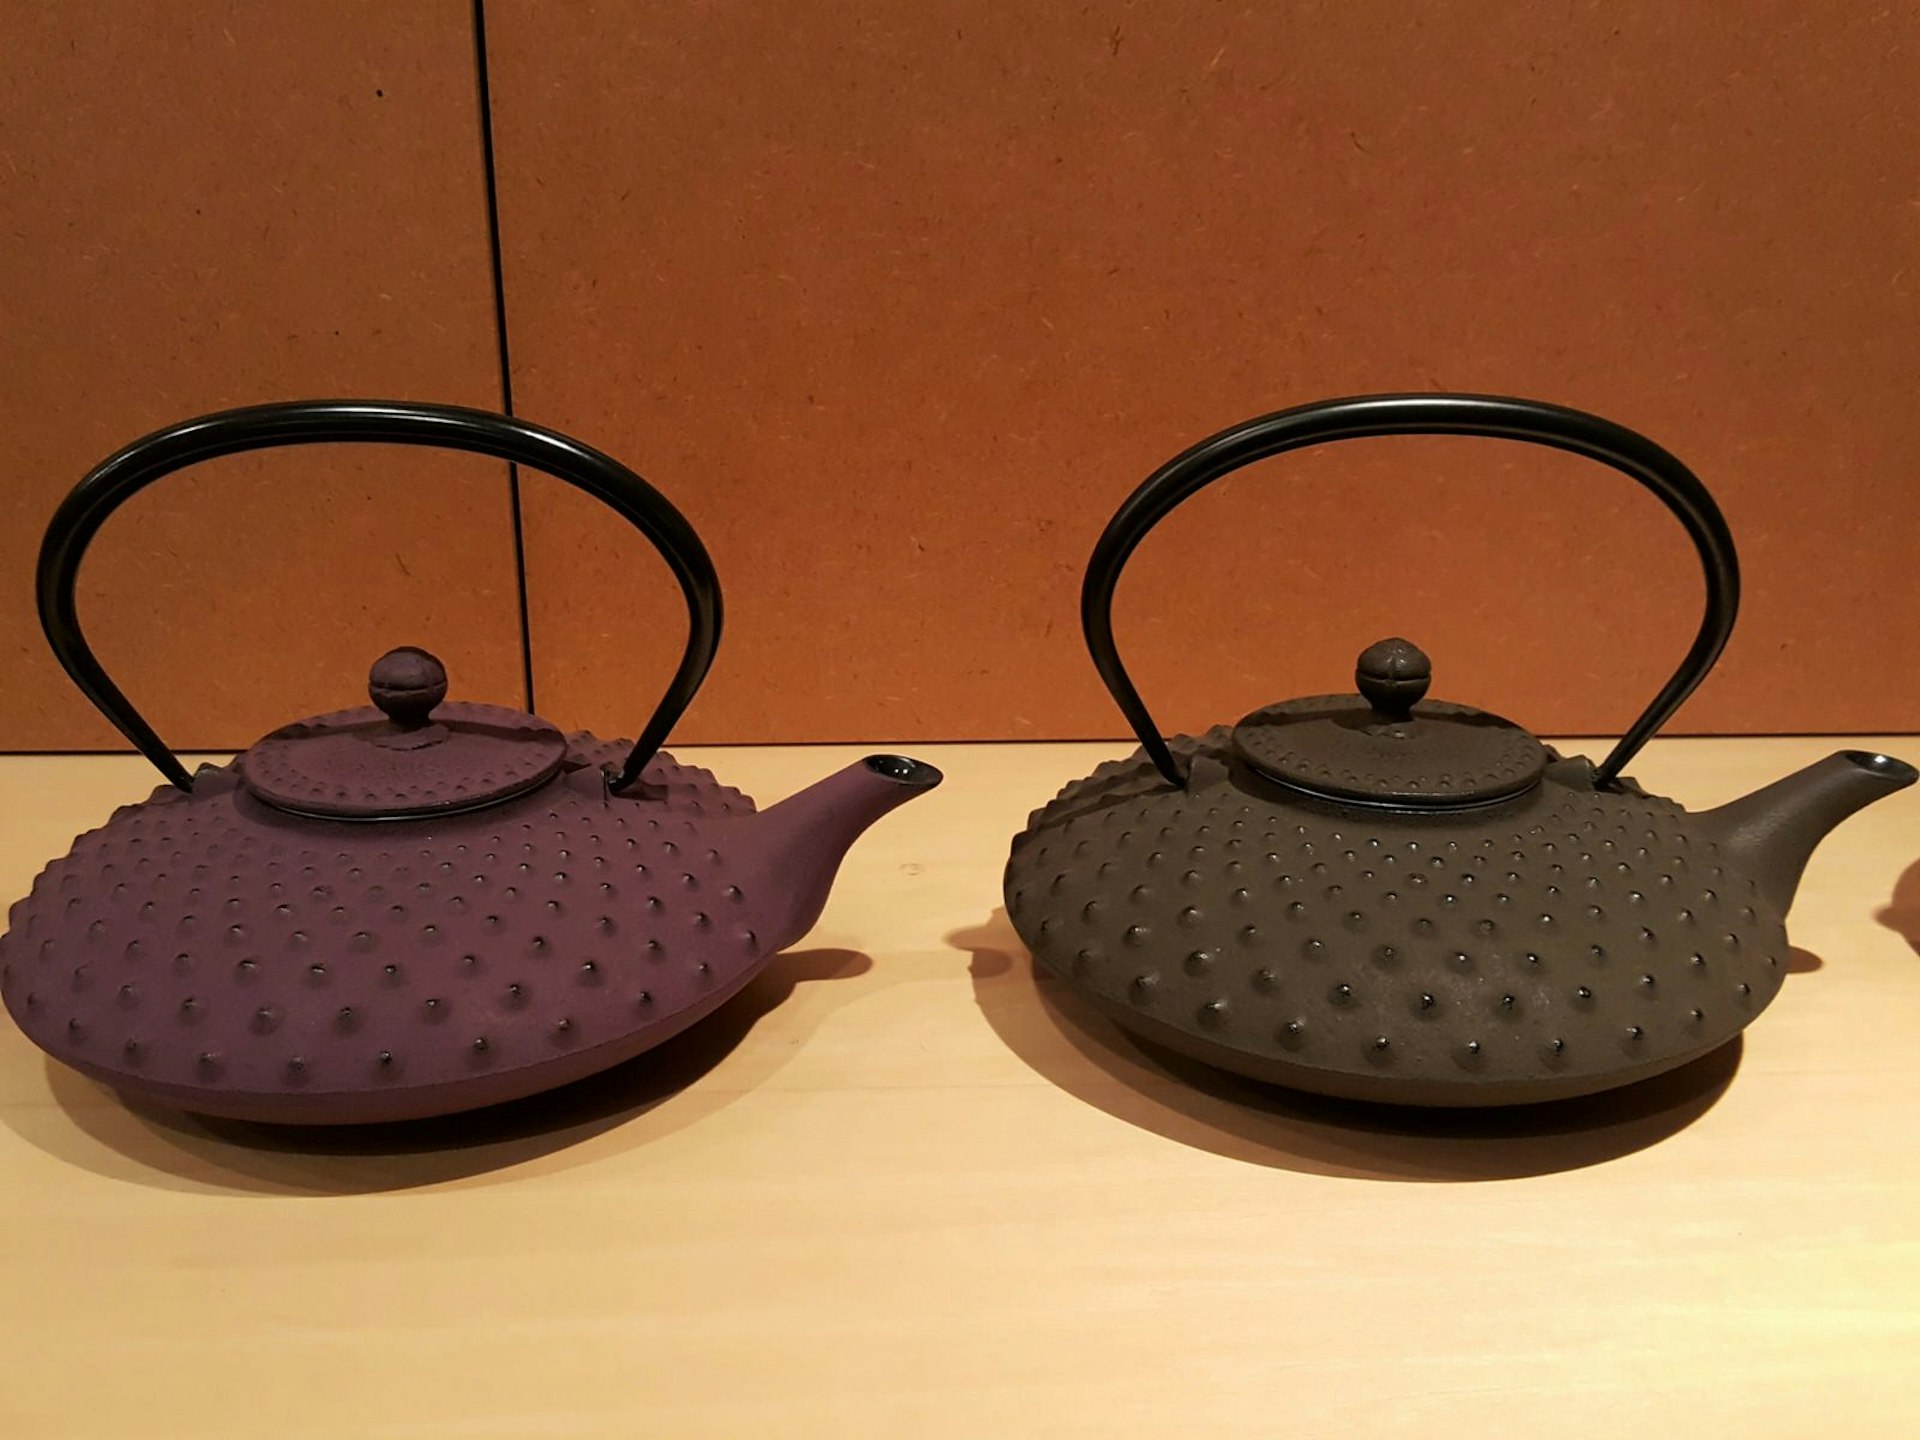 Two cast-iron tea kettles, one purple and one black, on a display shelf at Iwachu